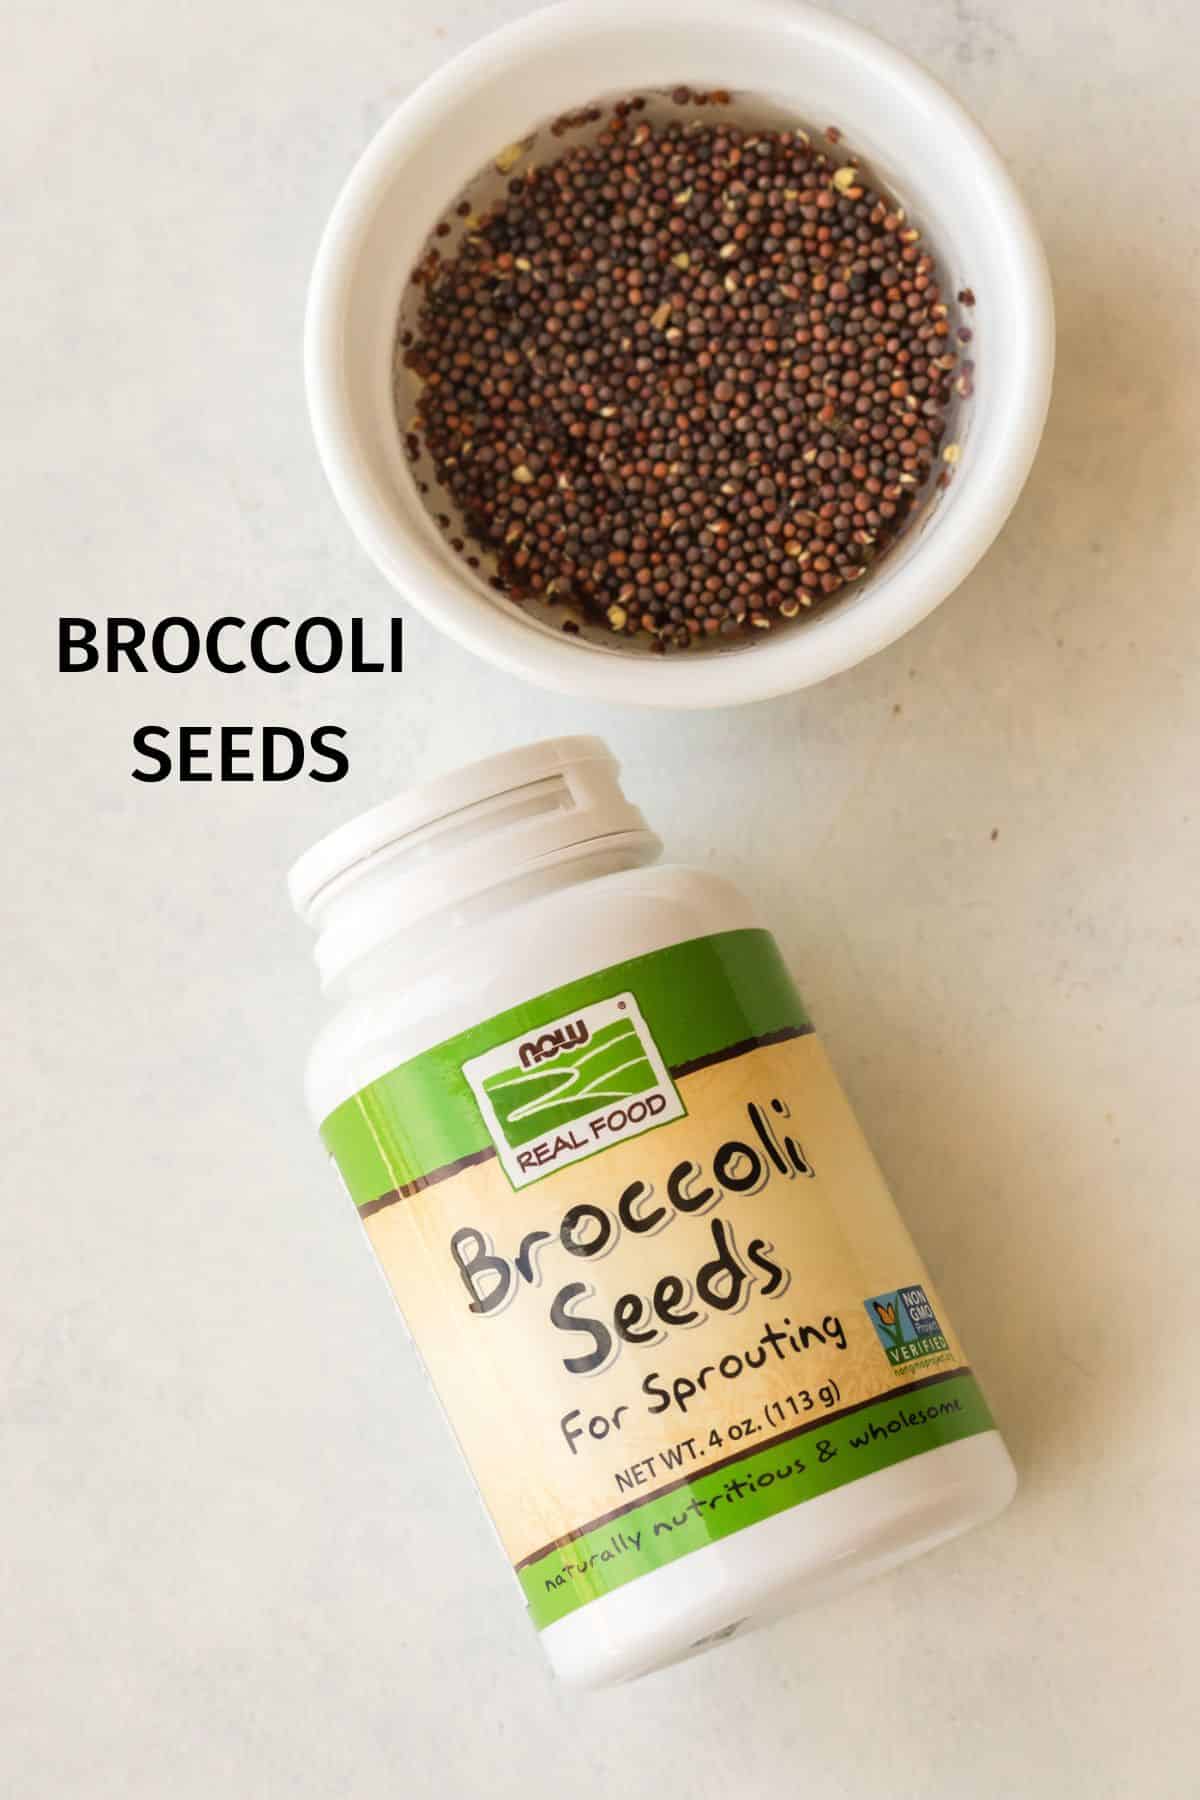 ingredients needed for sprouting broccoli seeds.